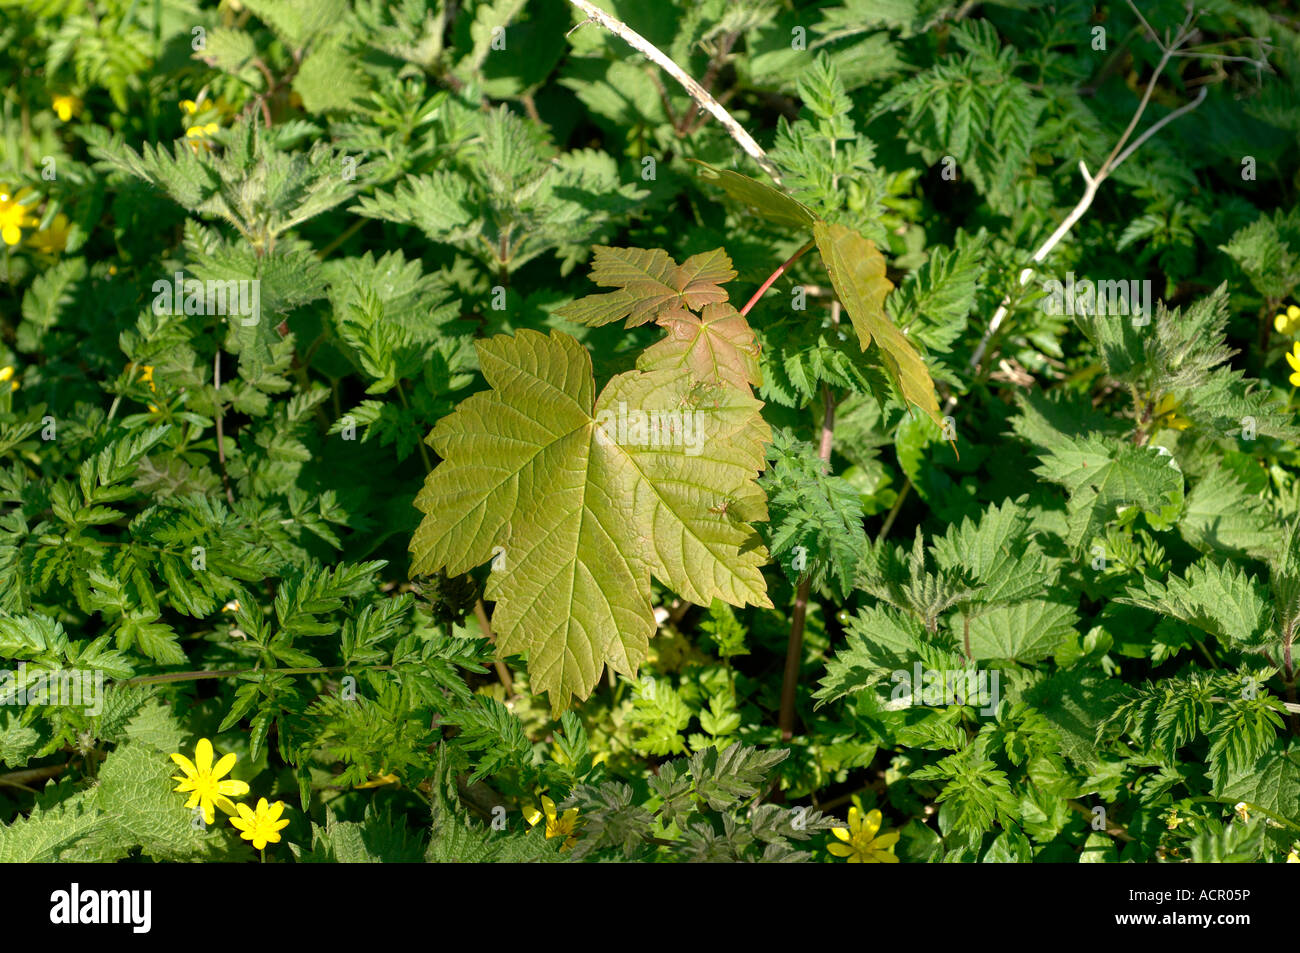 Sycamore Acer pseudoplatanus sapling emerging through other plants on a woodland floor Stock Photo